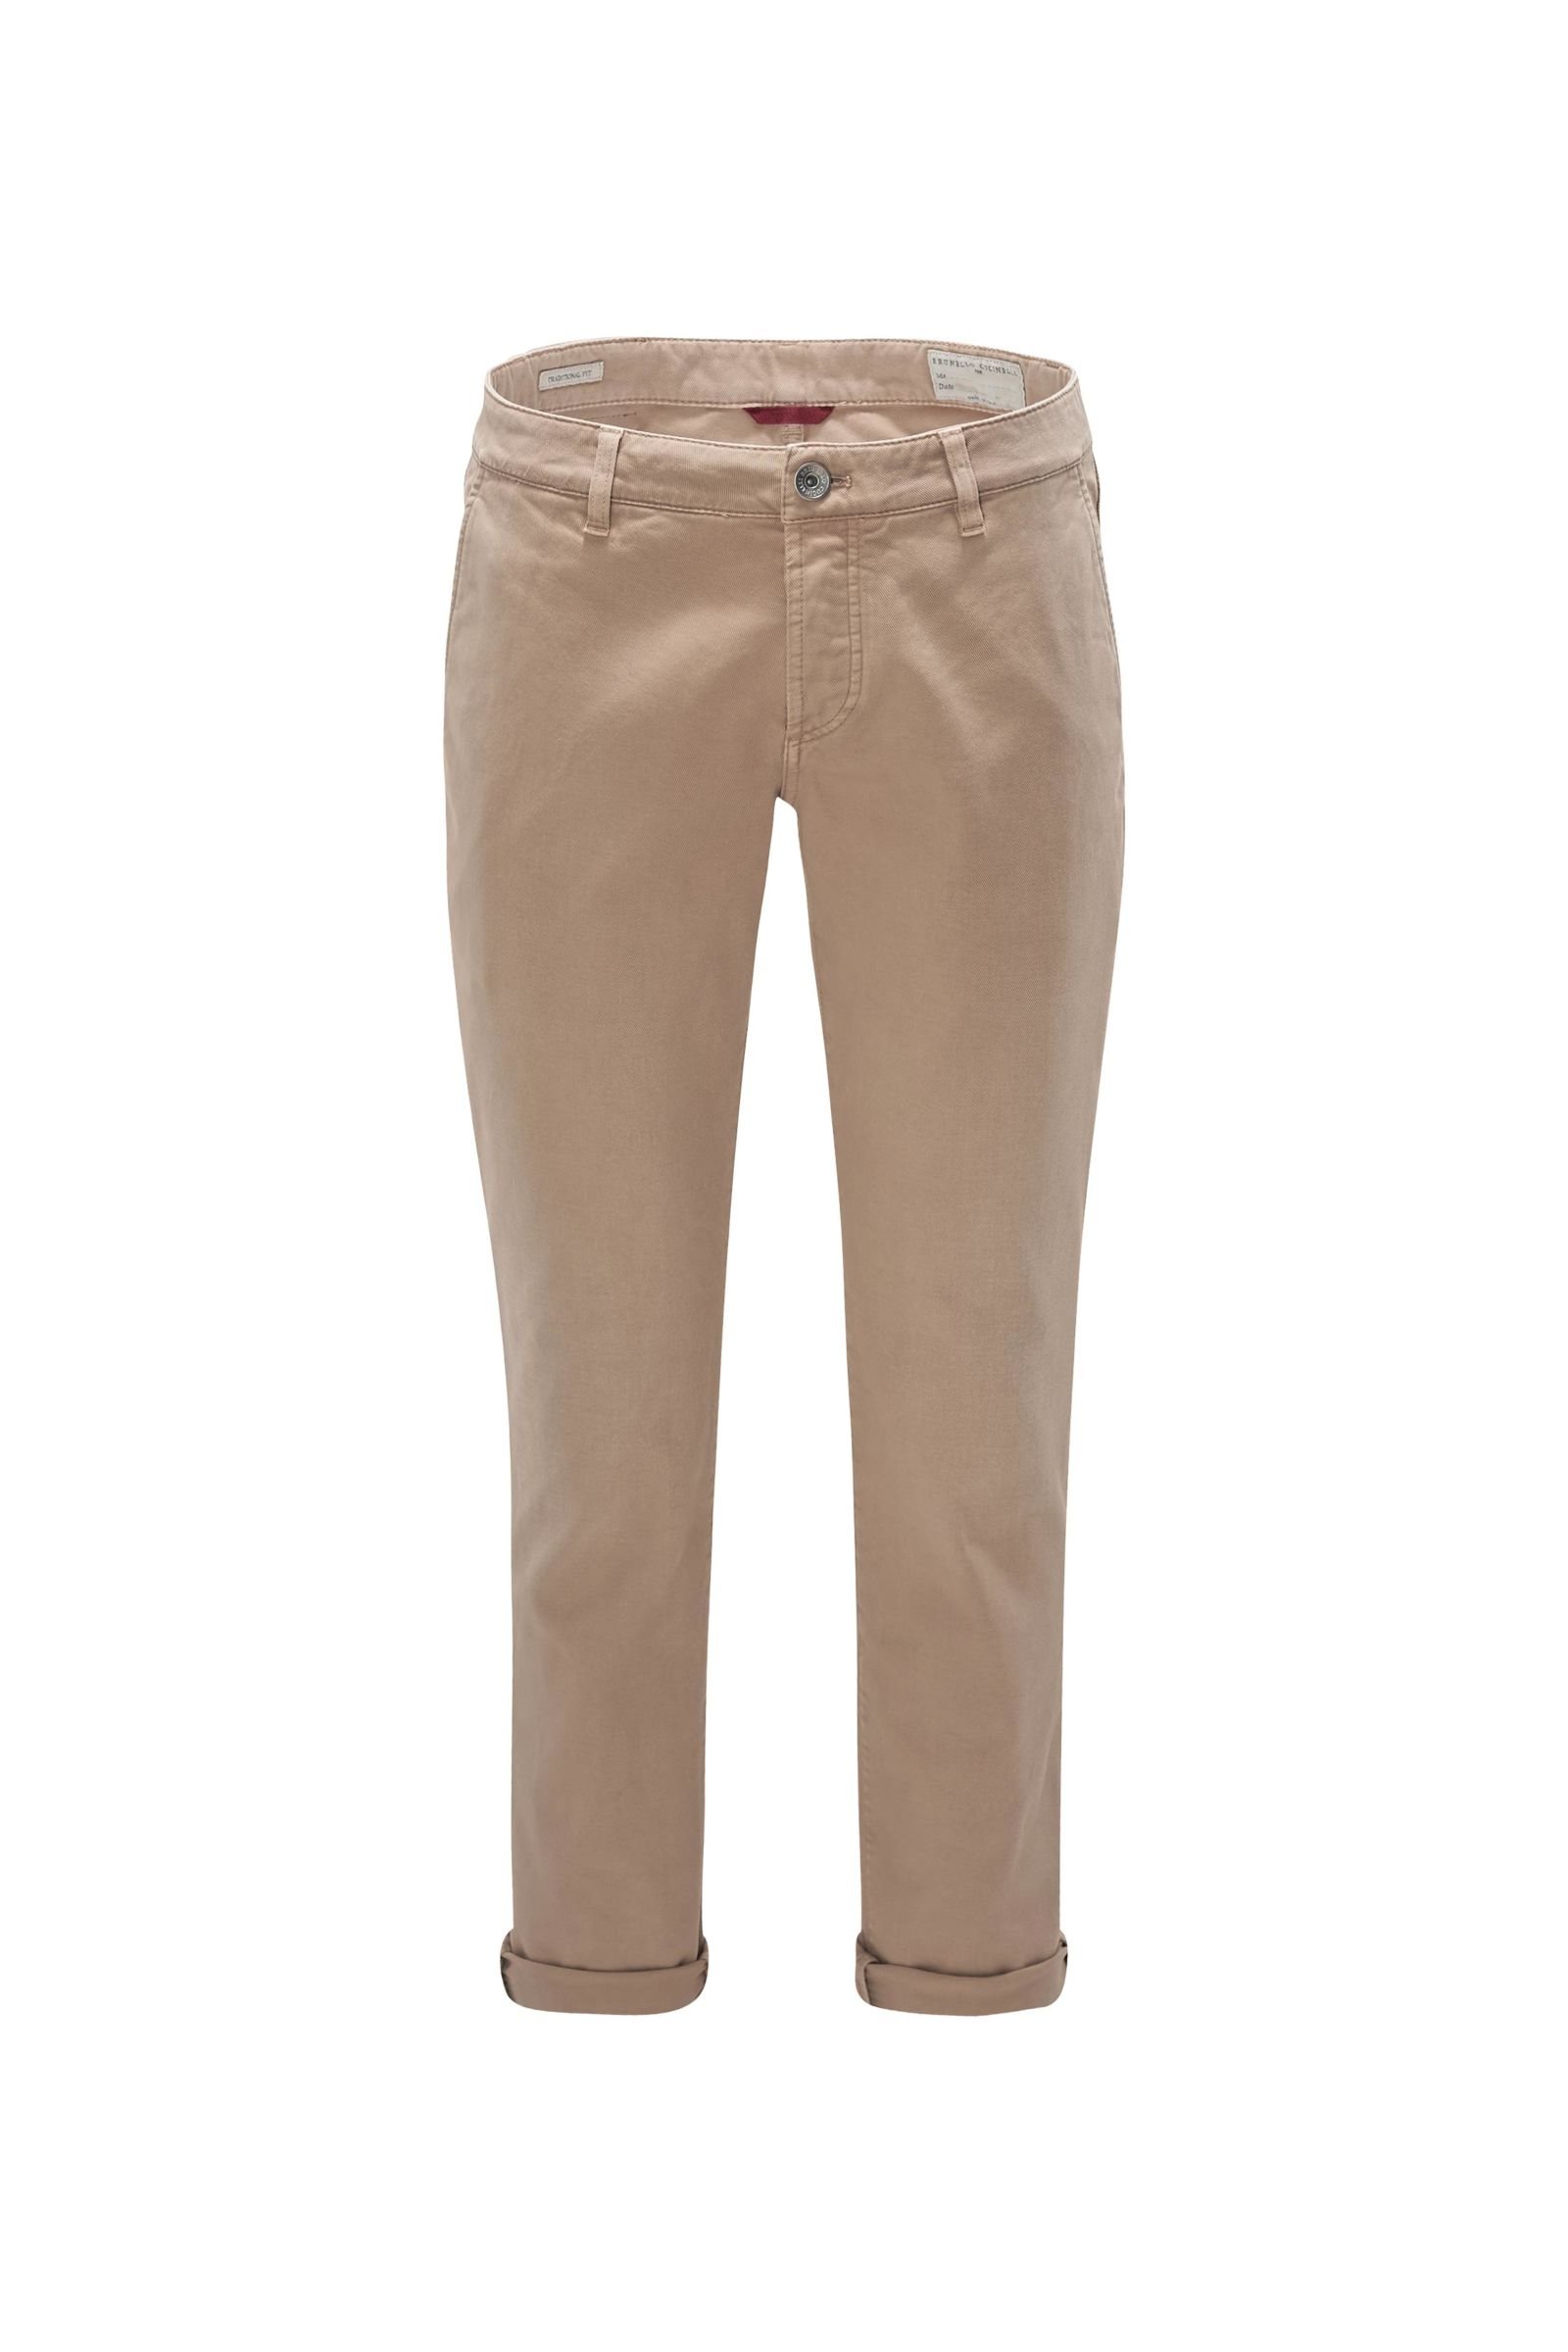 'Traditional Fit' trousers light brown